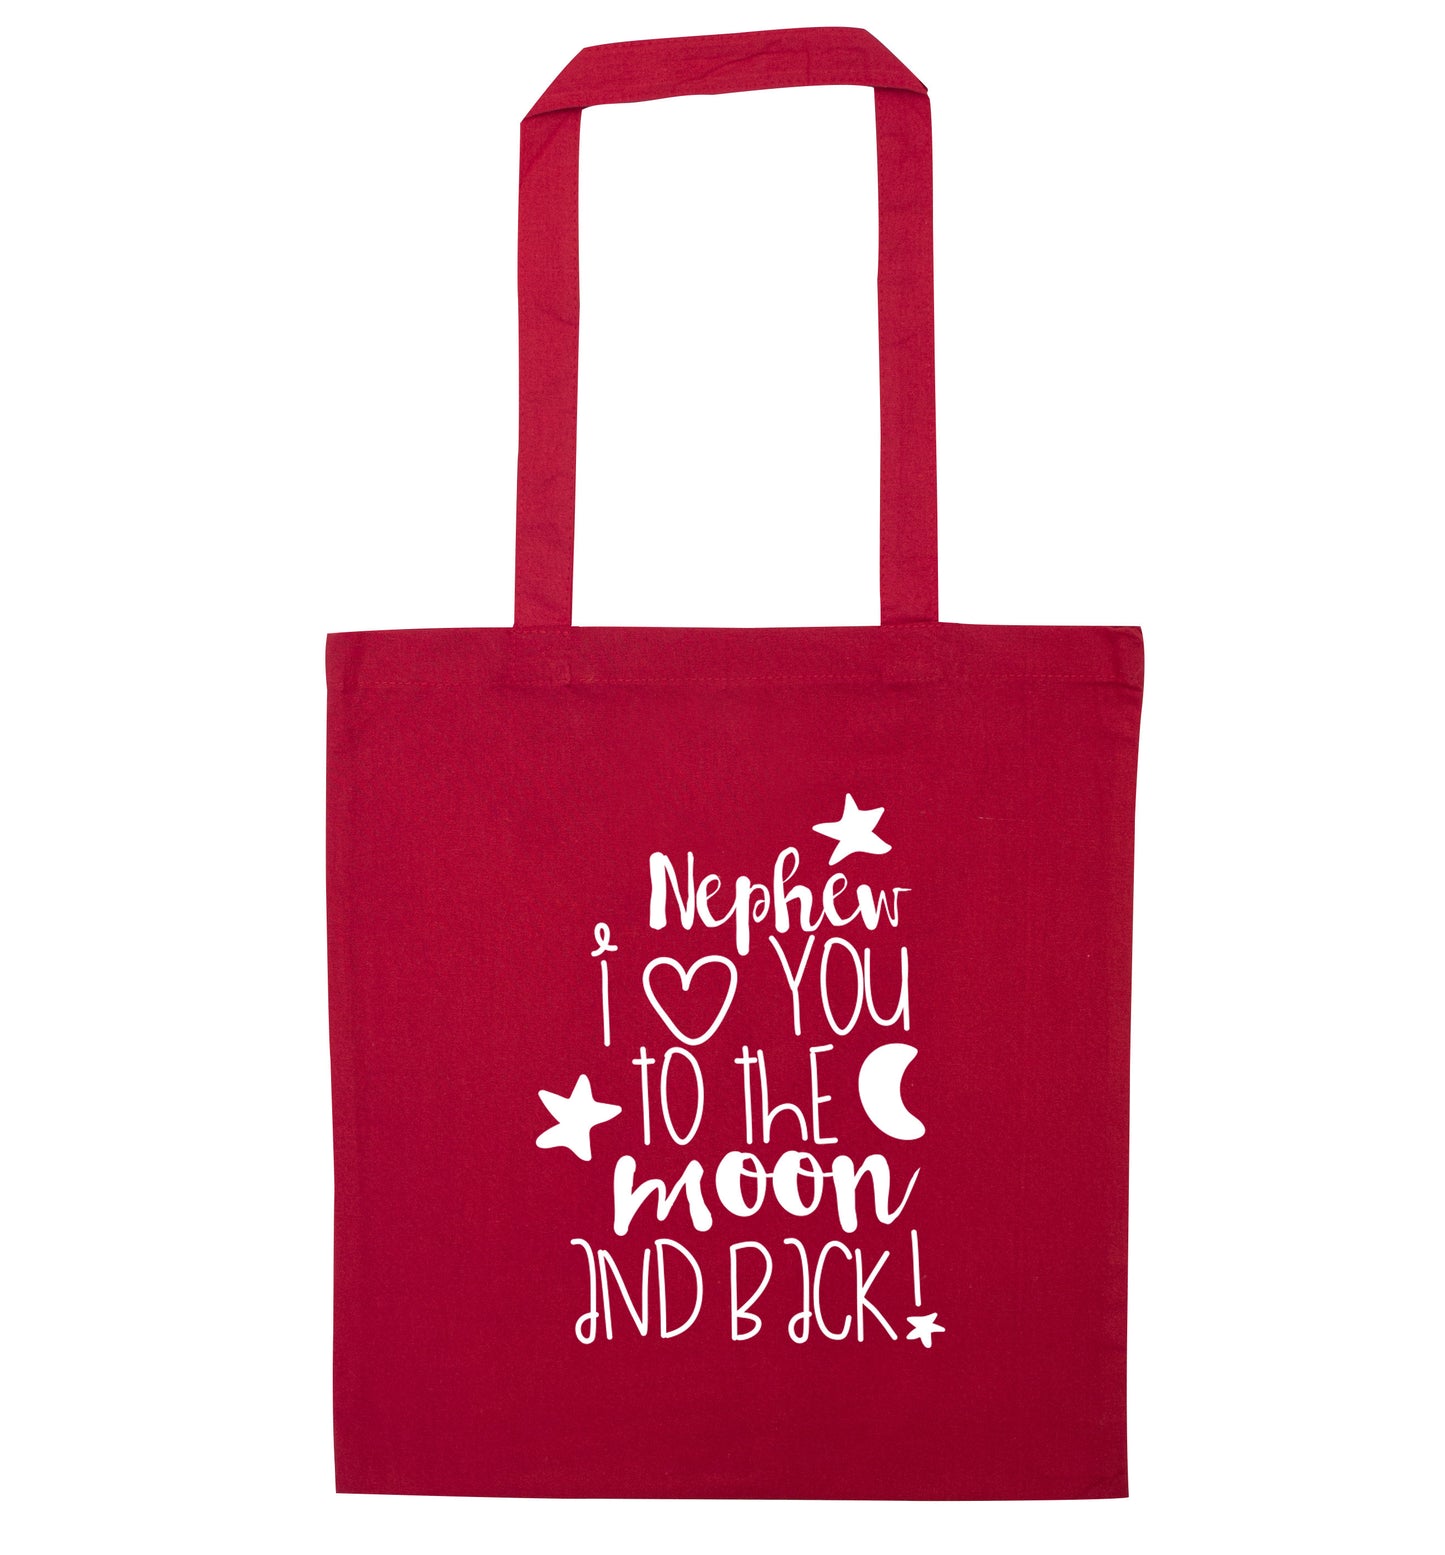 Nephew I love you to the moon and back red tote bag